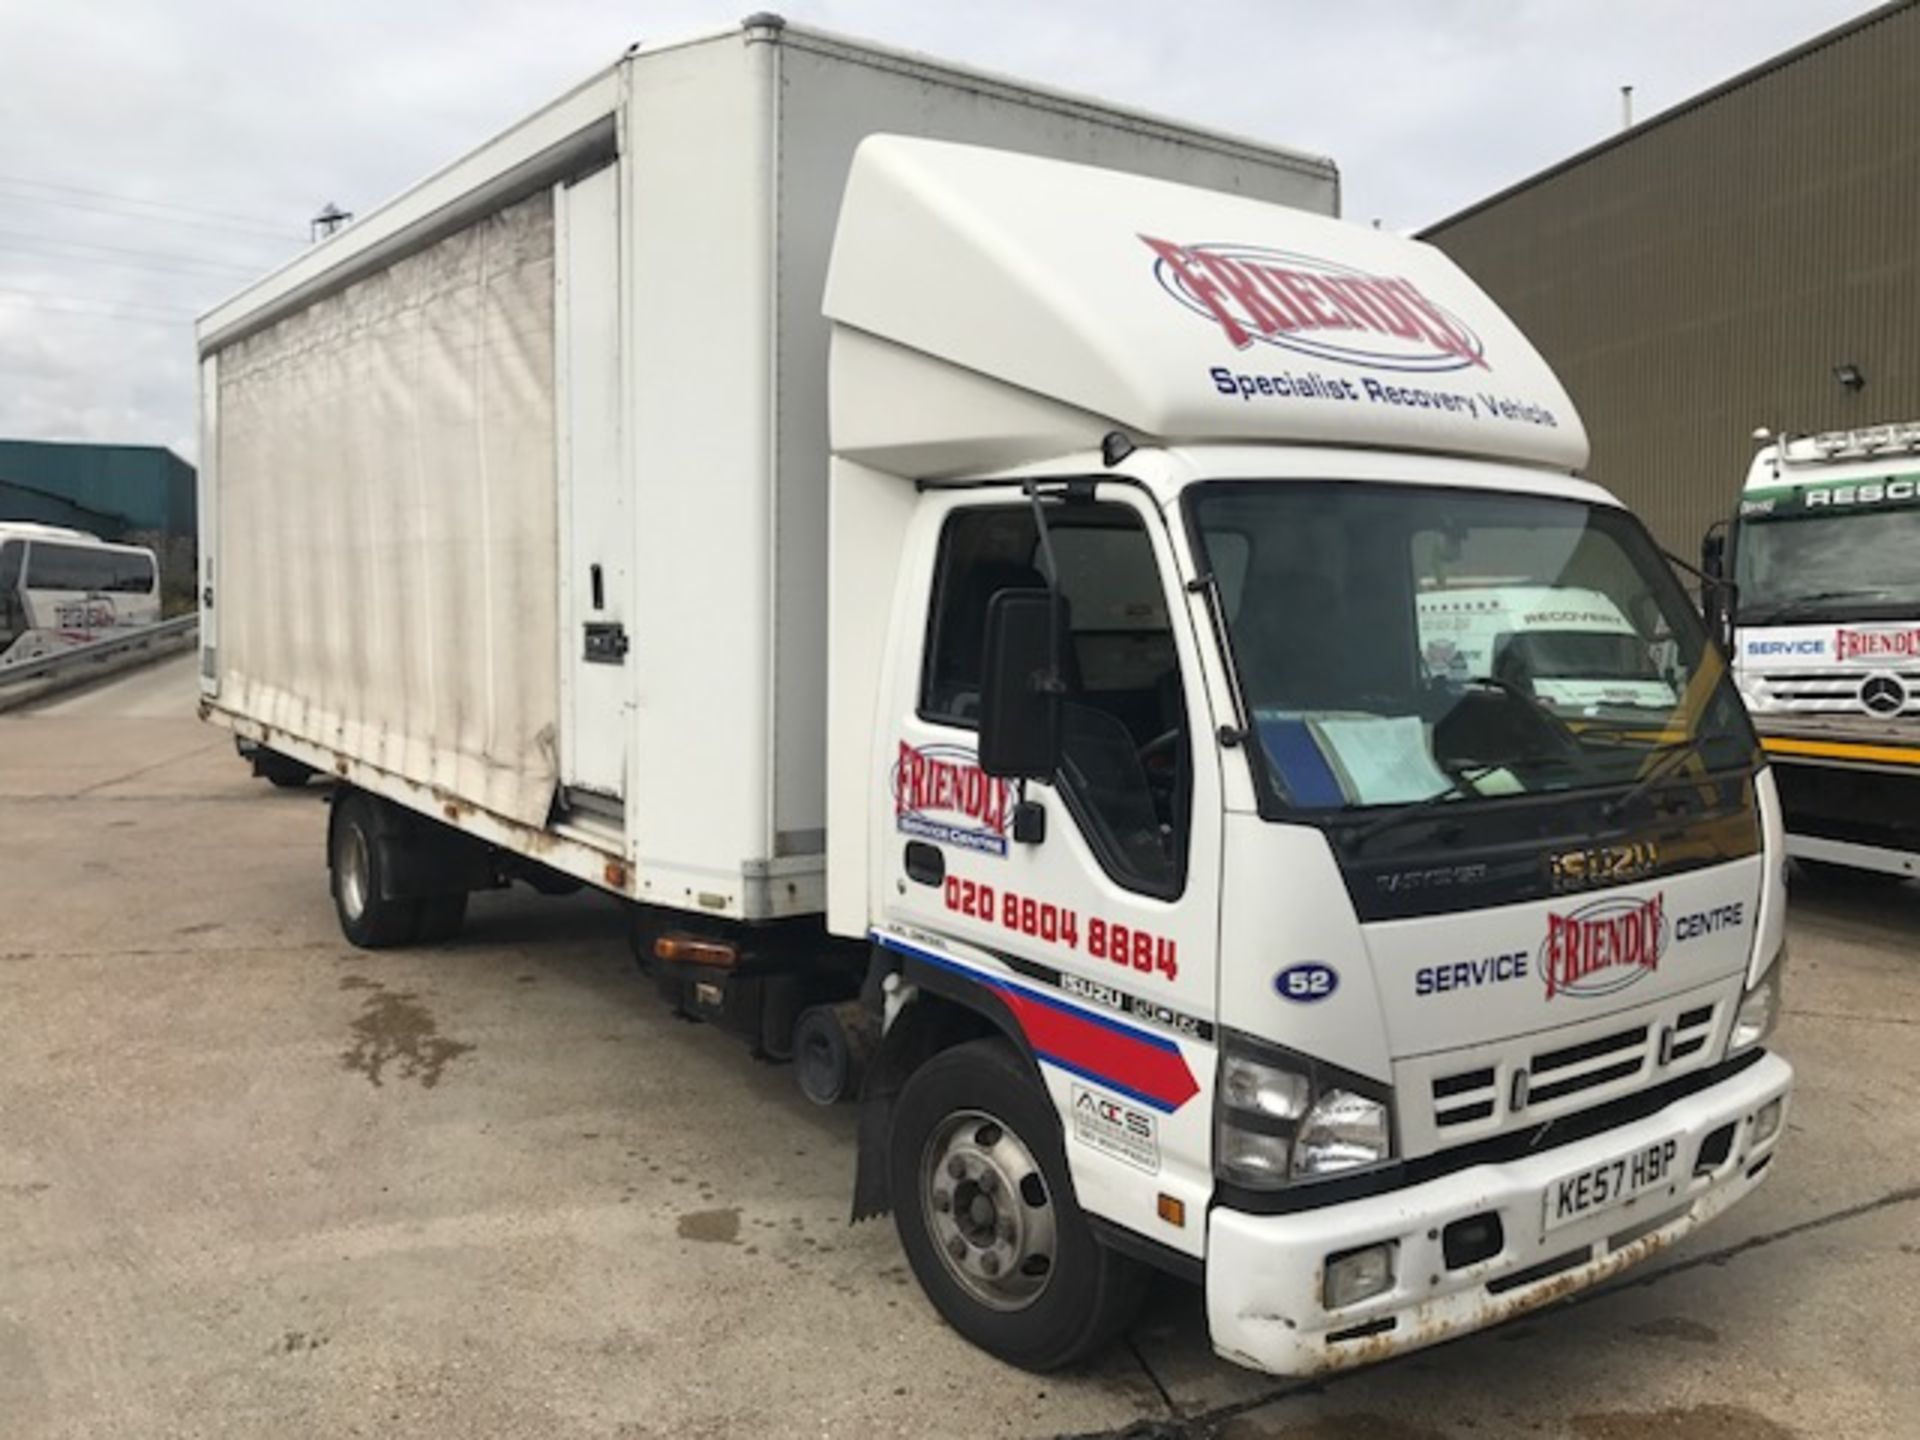 2008 Isuzu NQR Easy Shift 70 7.5T tilt and slide breakdown recovery vehicle complete with